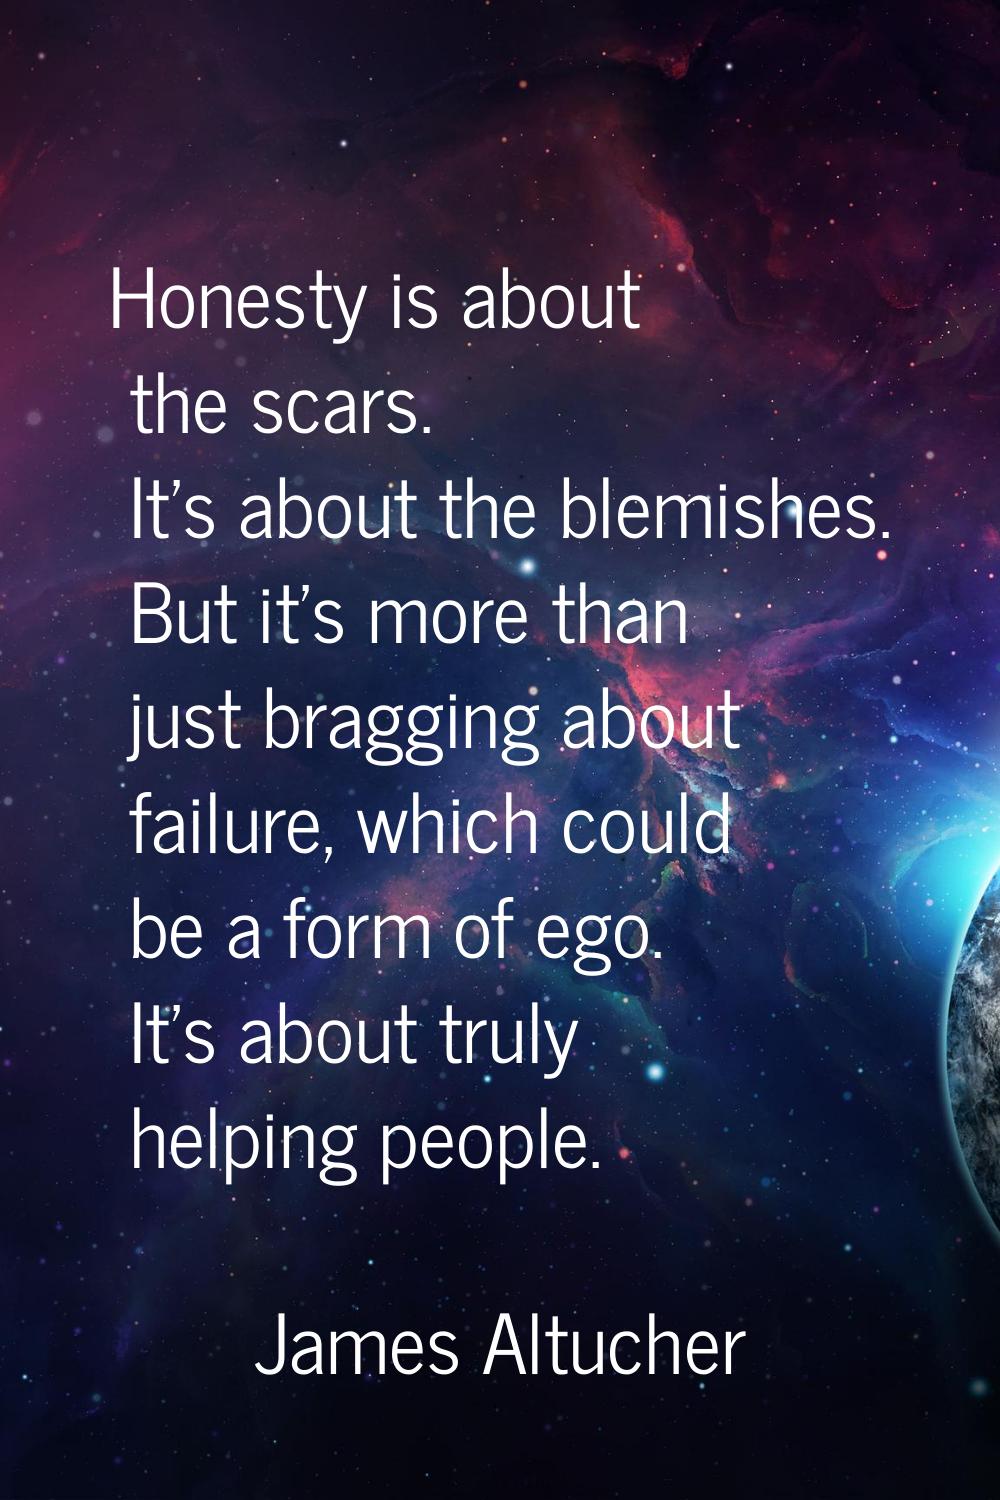 Honesty is about the scars. It's about the blemishes. But it's more than just bragging about failur